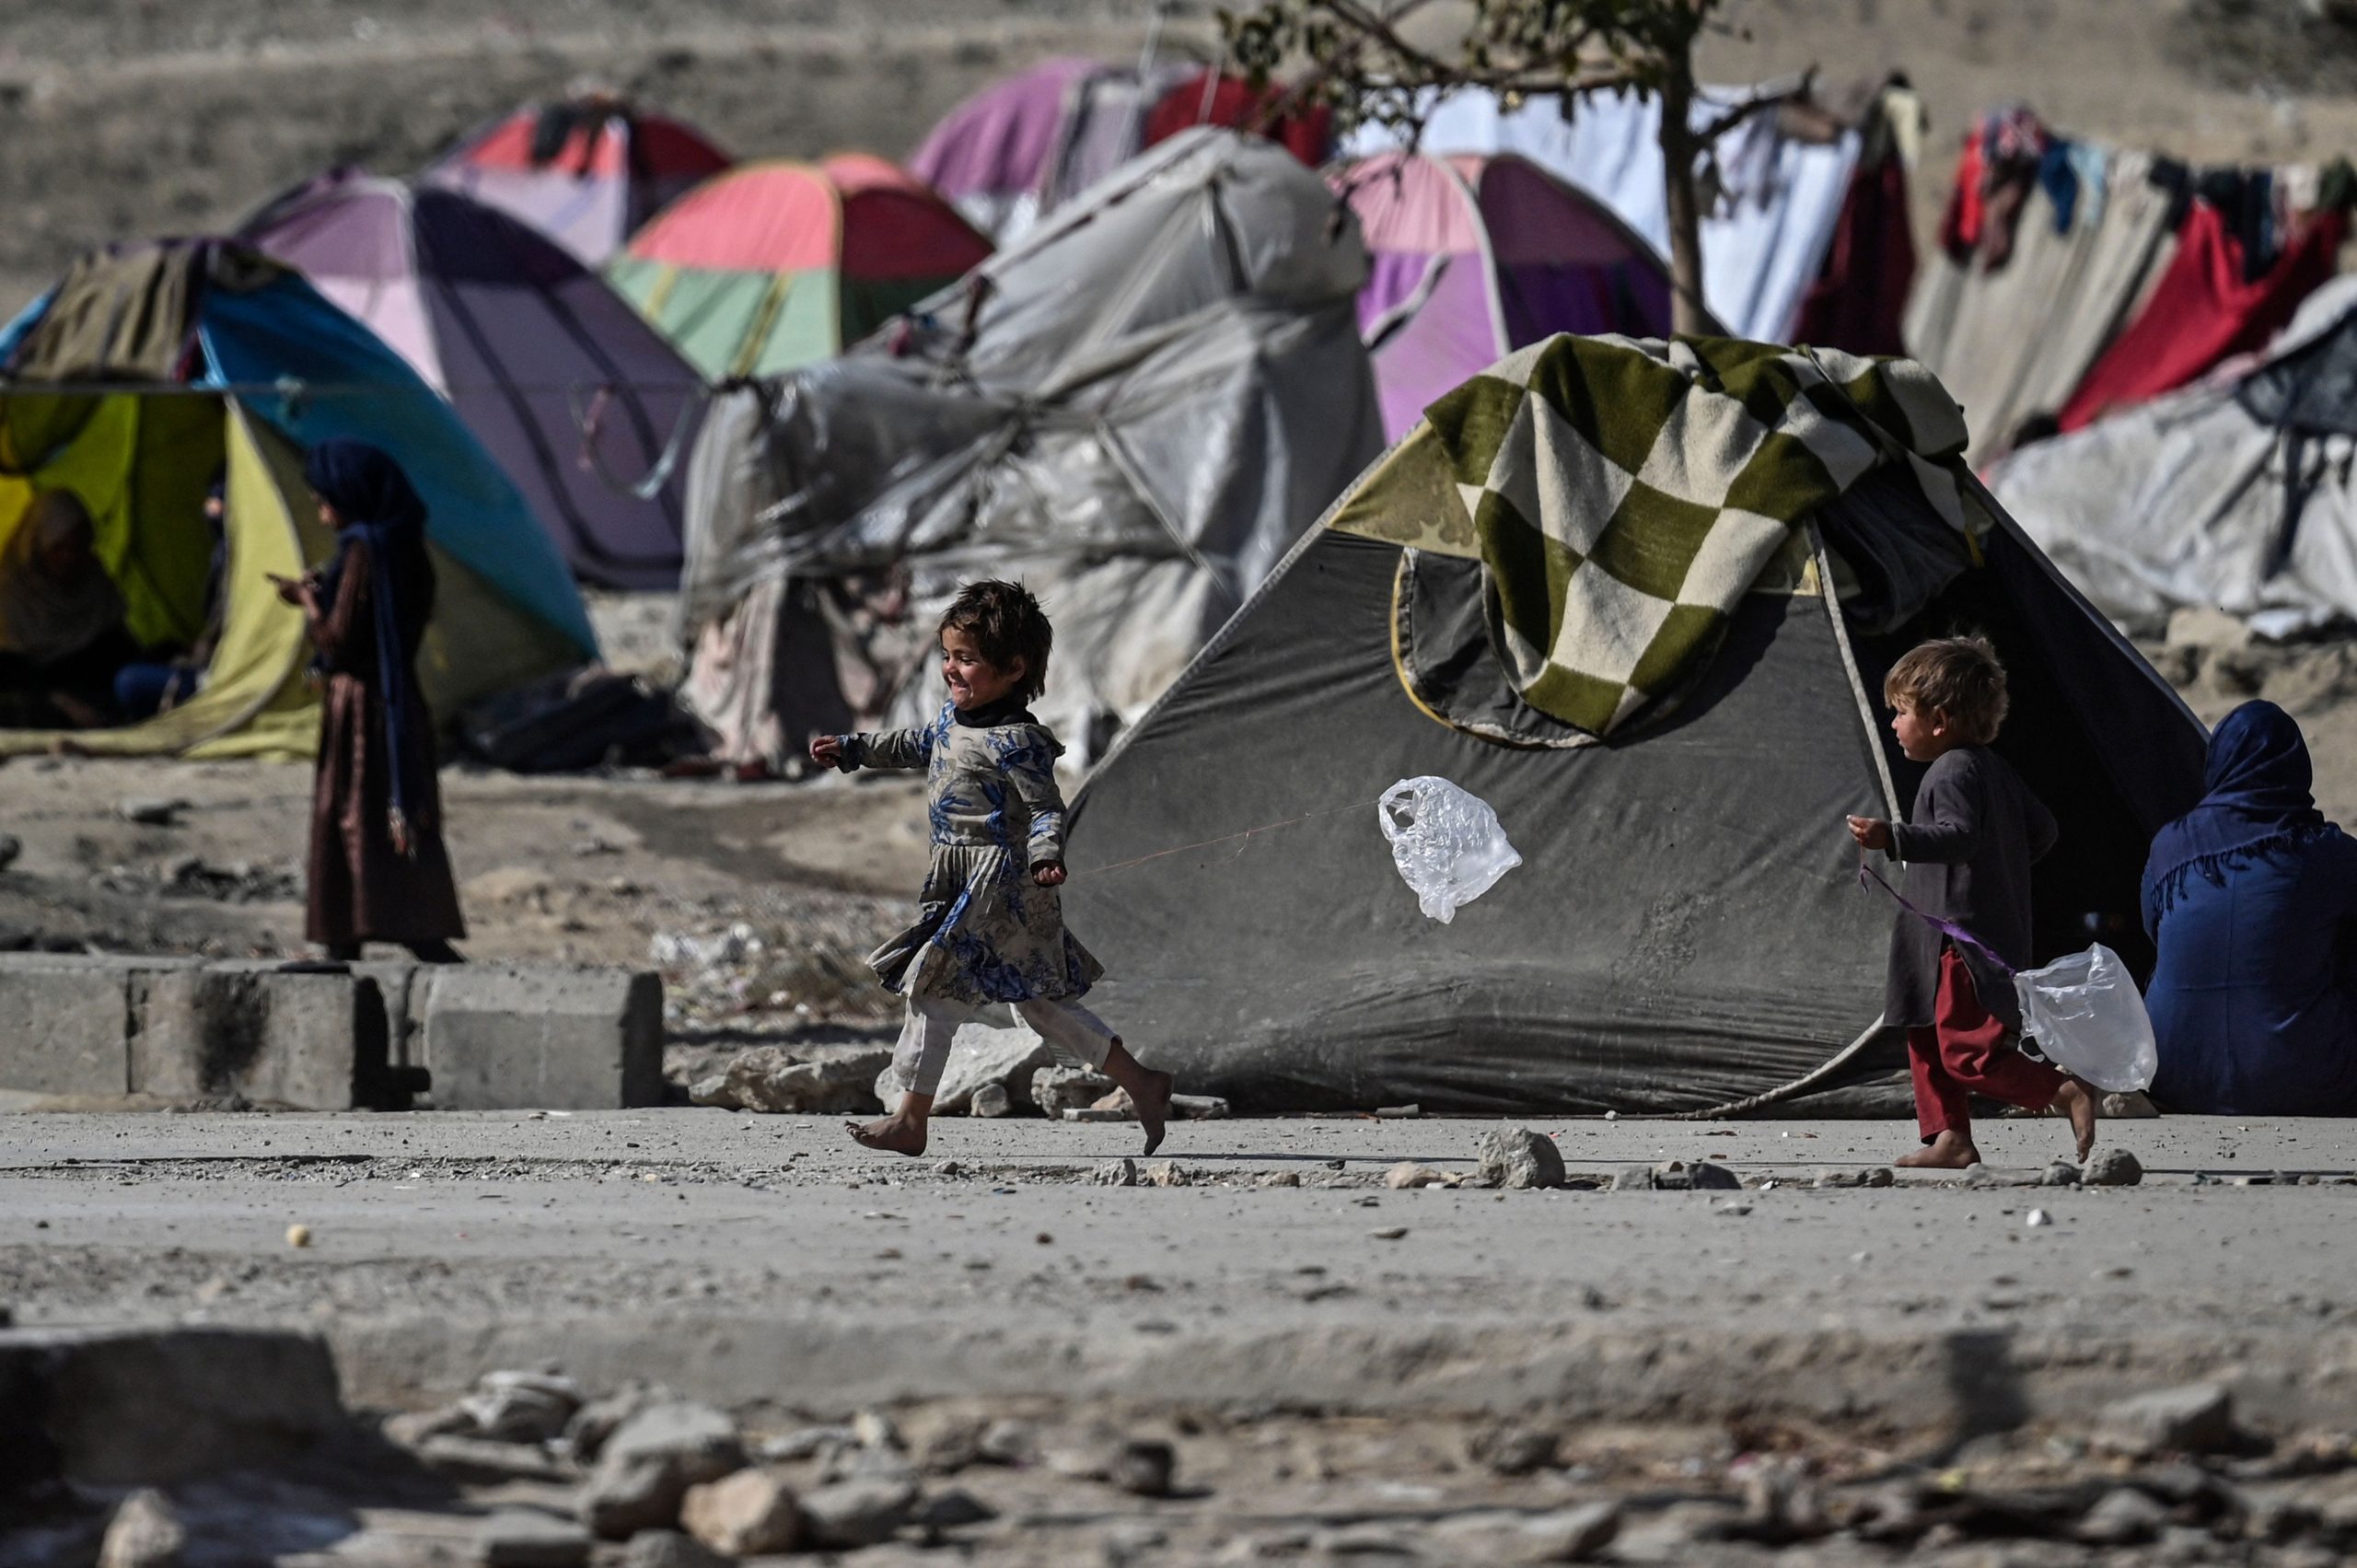 Children are seen running amid a cluster of tents and dirt pathways.